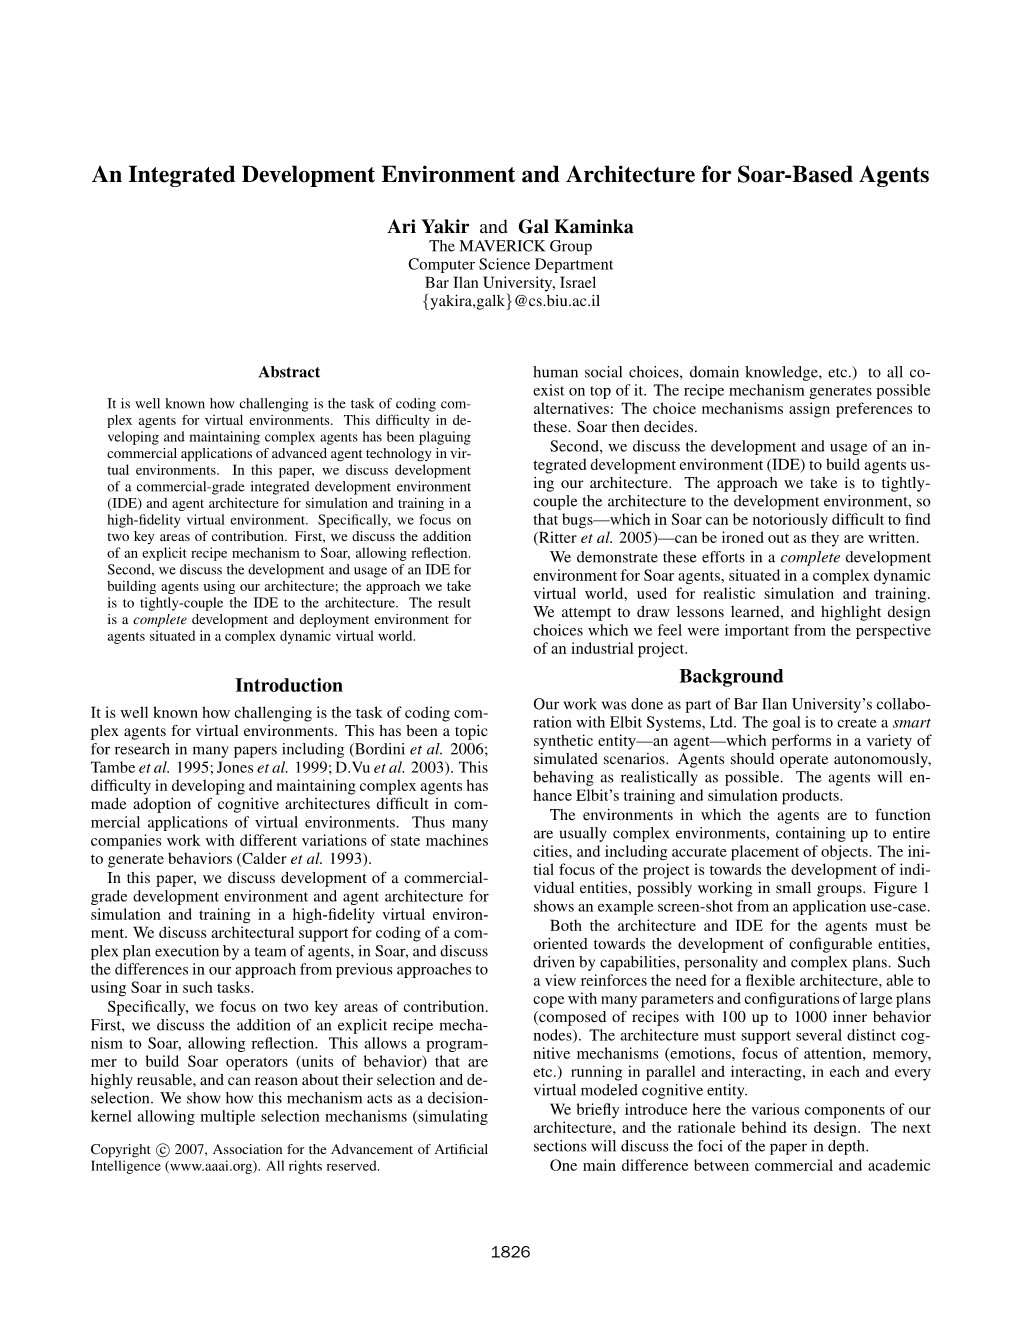 An Integrated Development Environment and Architecture for Soar-Based Agents